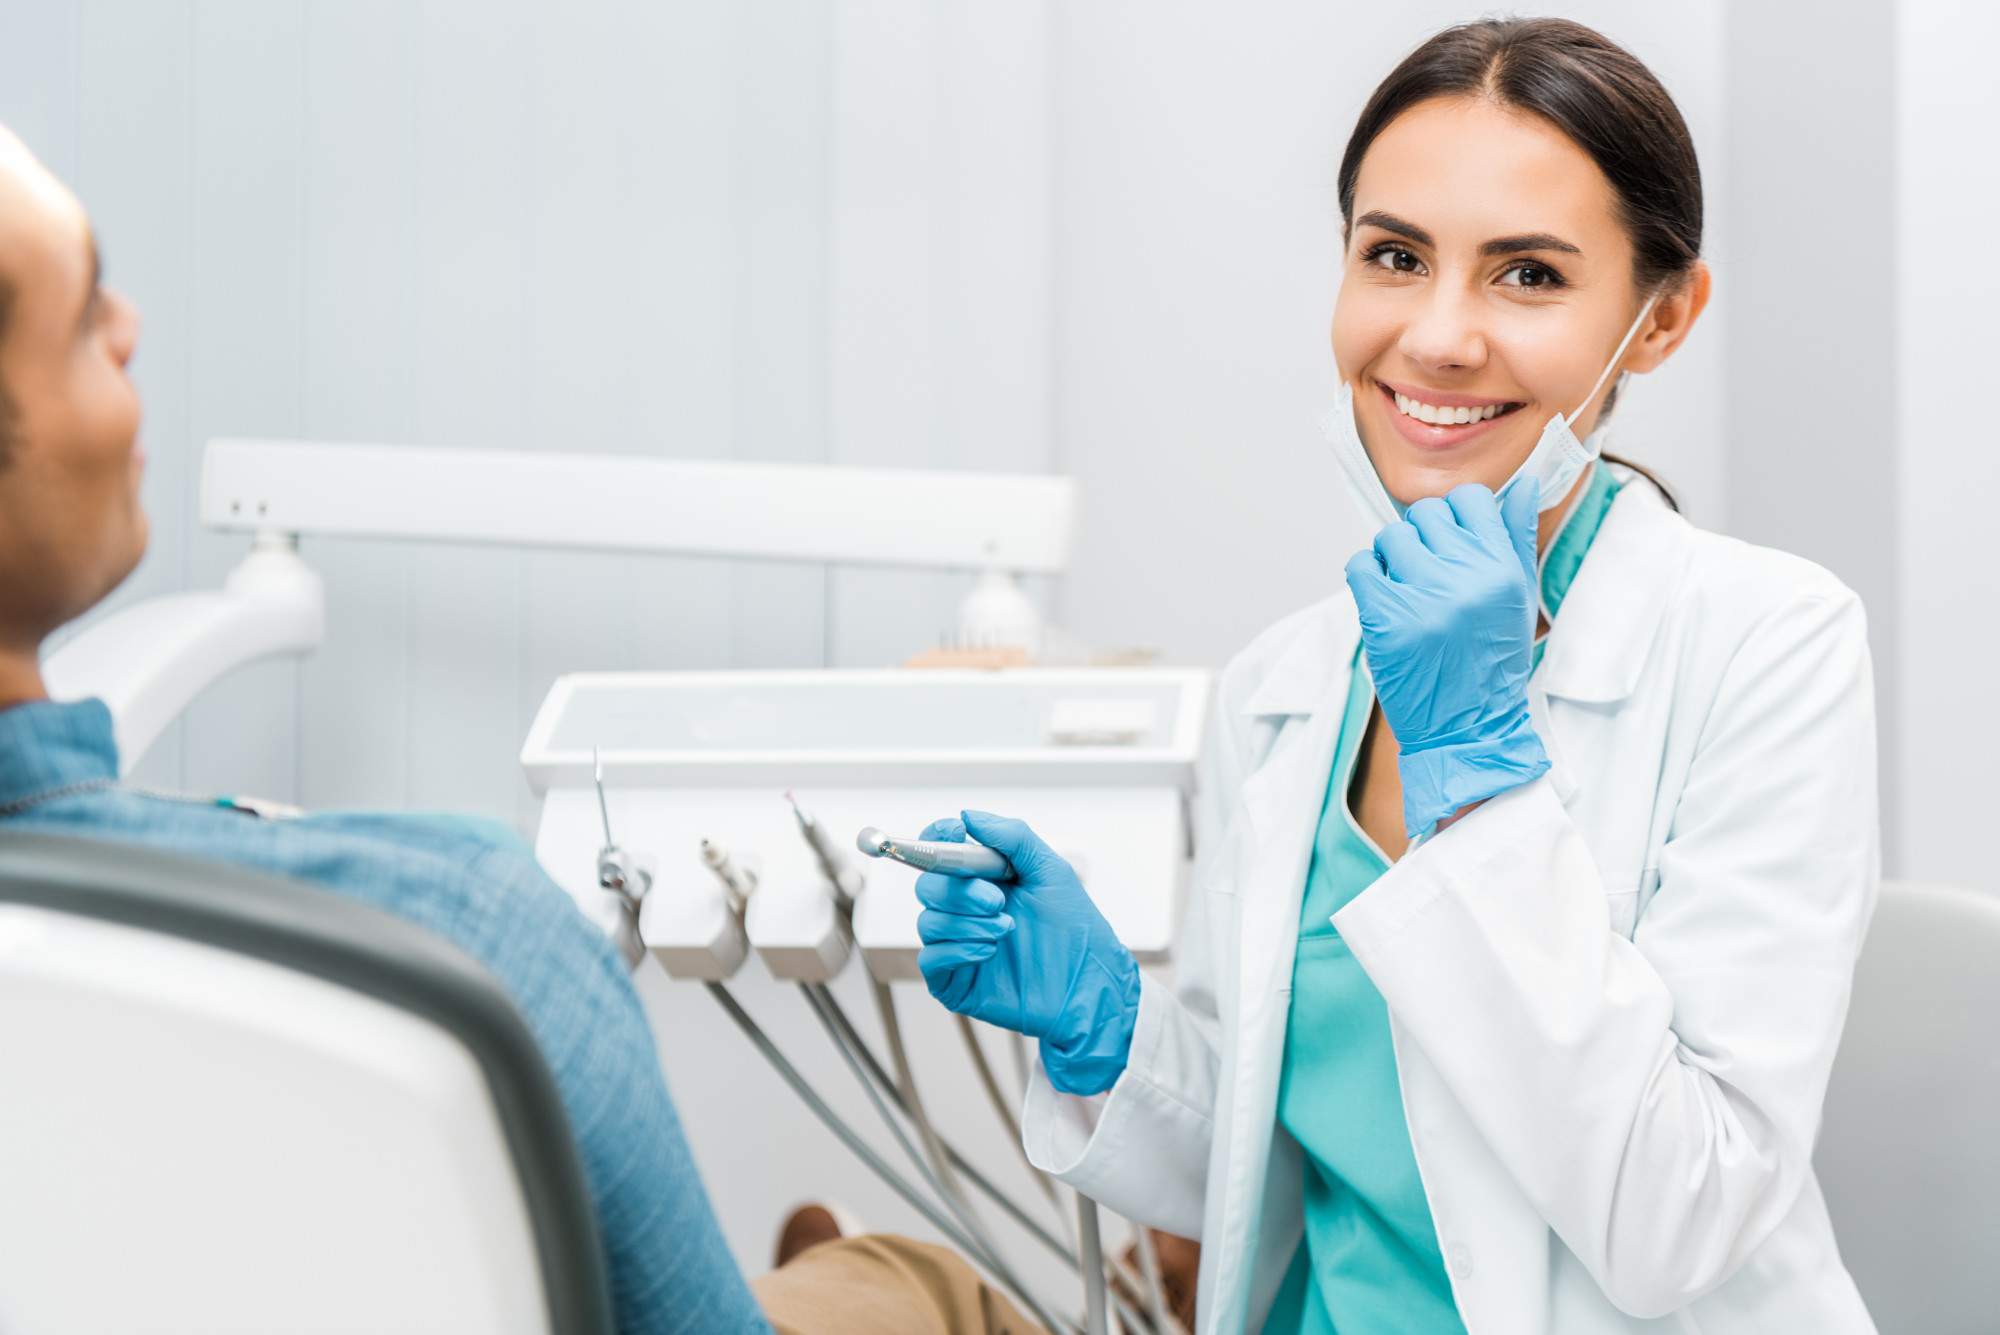 7 Signs You Need to Make a Dentist Appointment